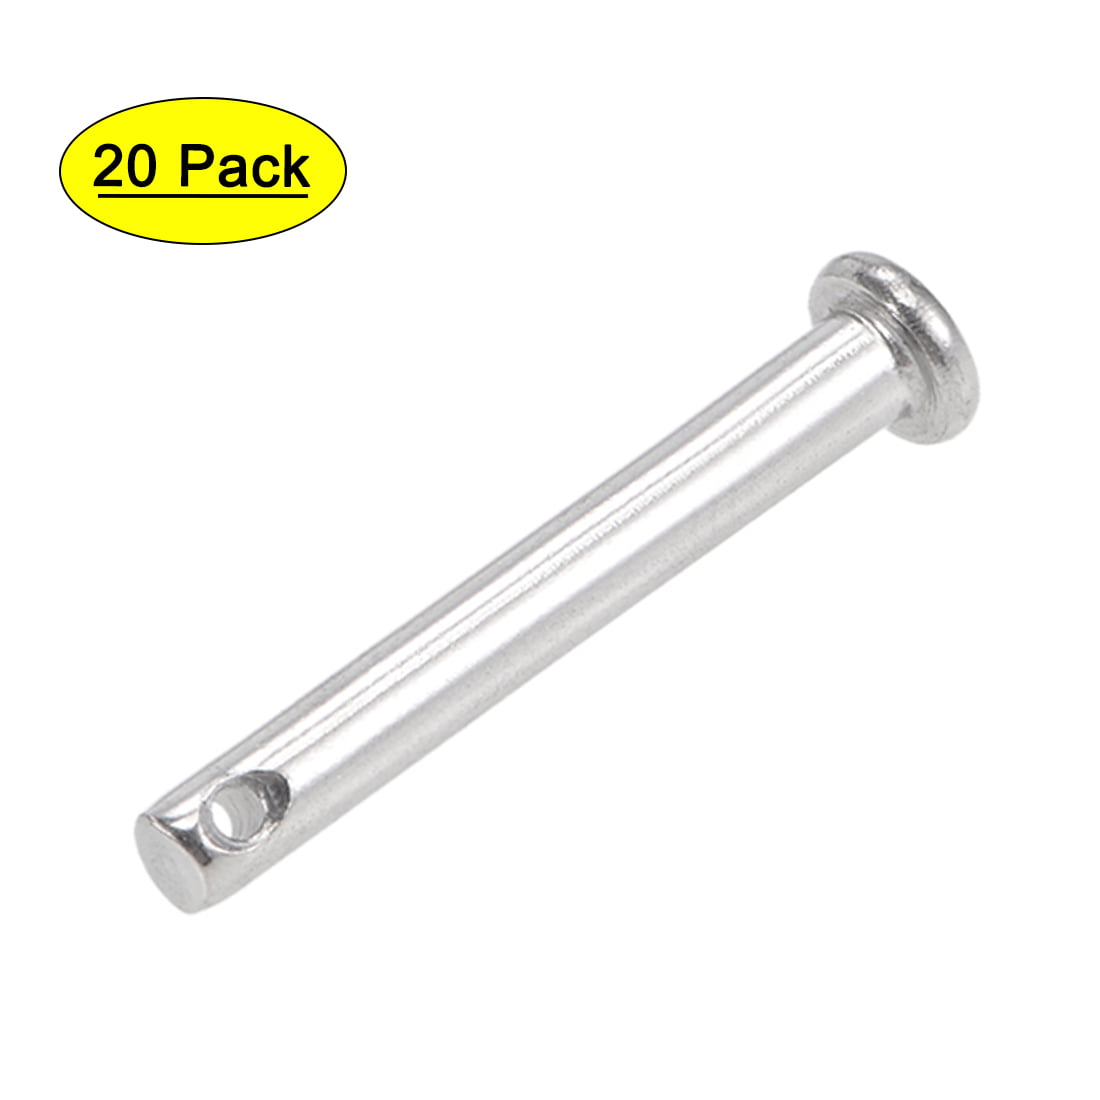 10mm x 30mm Flat Head 304 Stainless Steel Link Hinge Single Hole Clevis Pins 